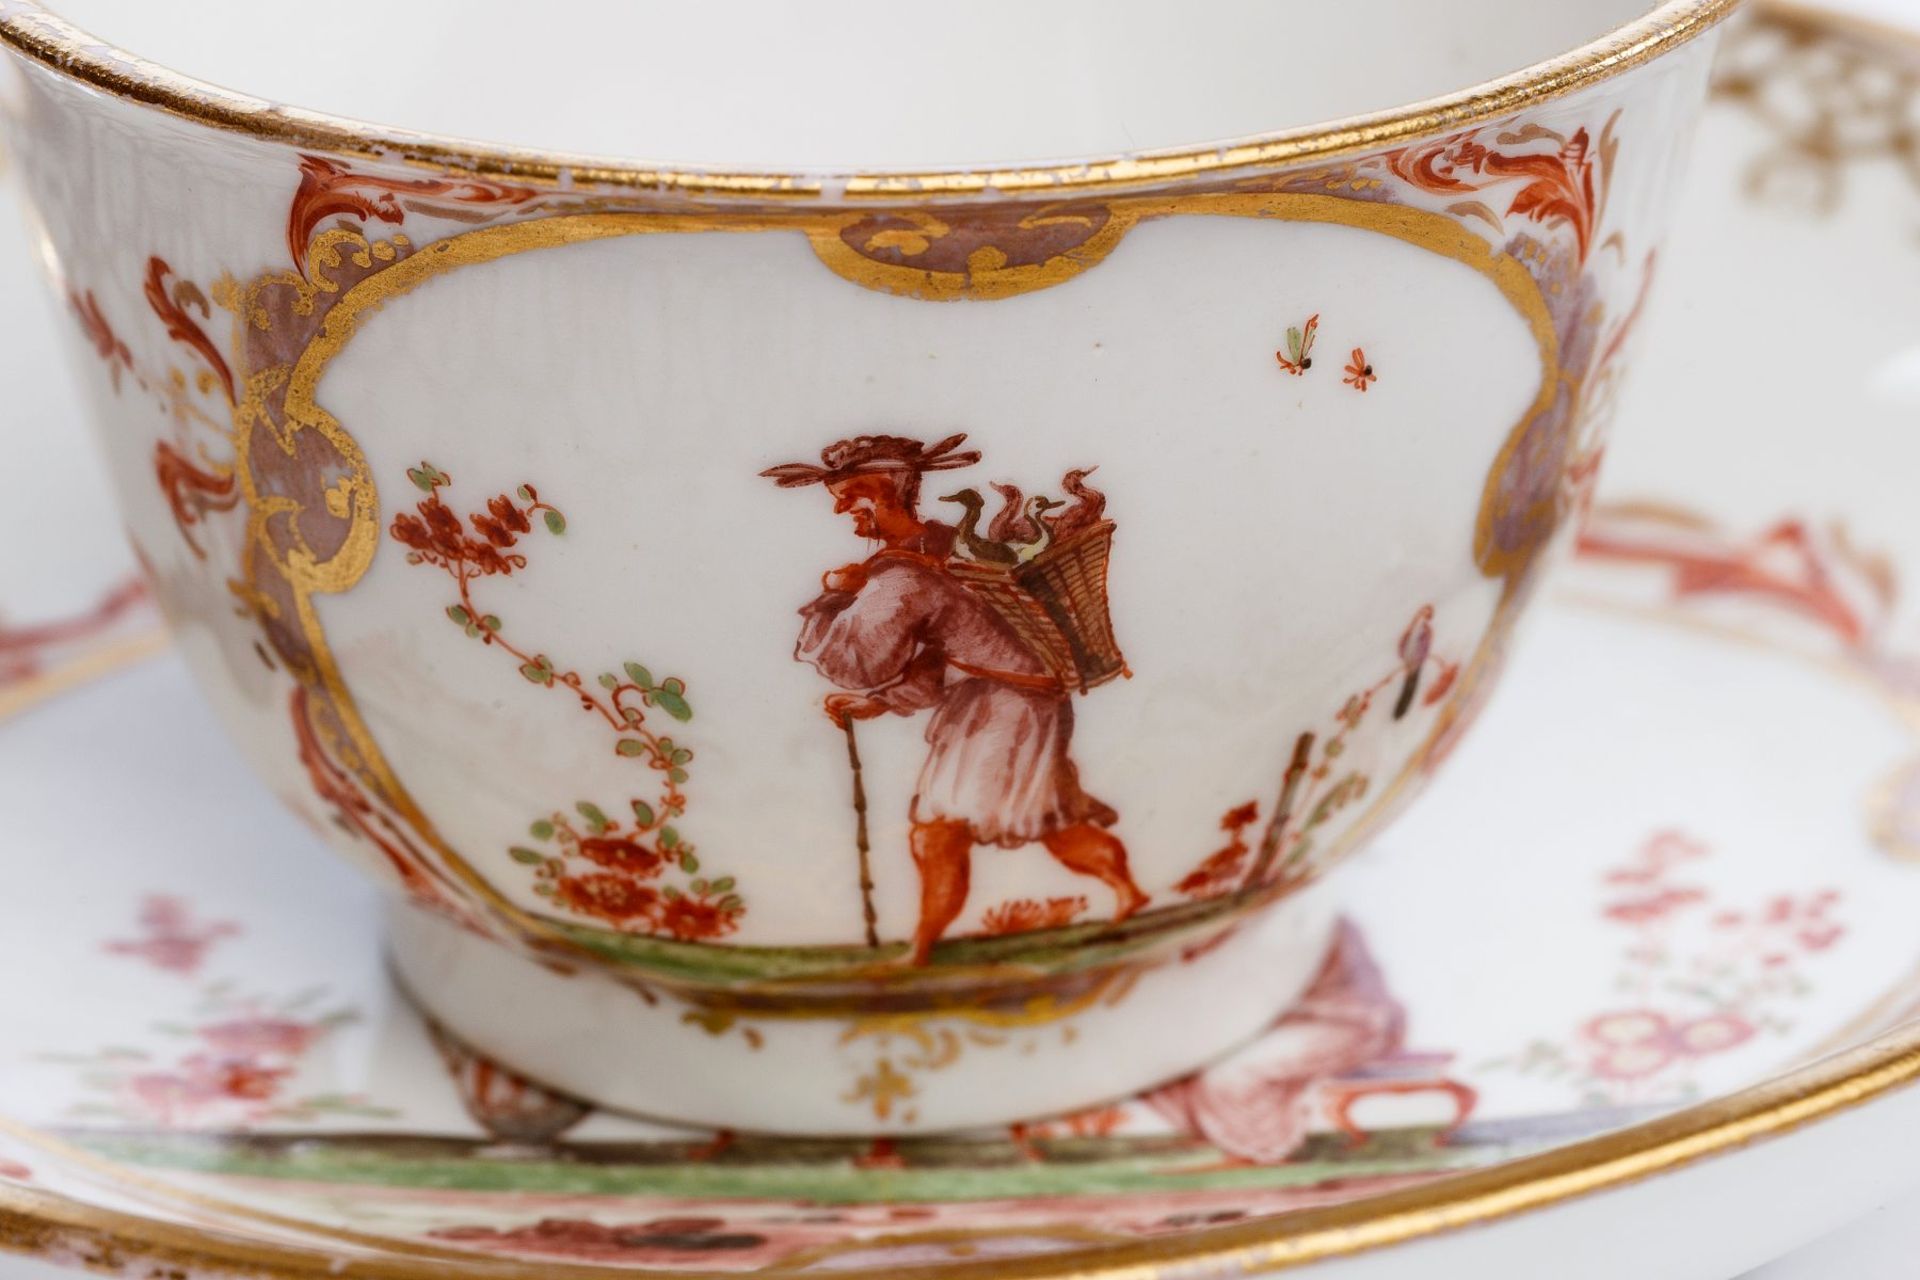 Bowl with saucer, Meissen 1720/25 - Image 5 of 6